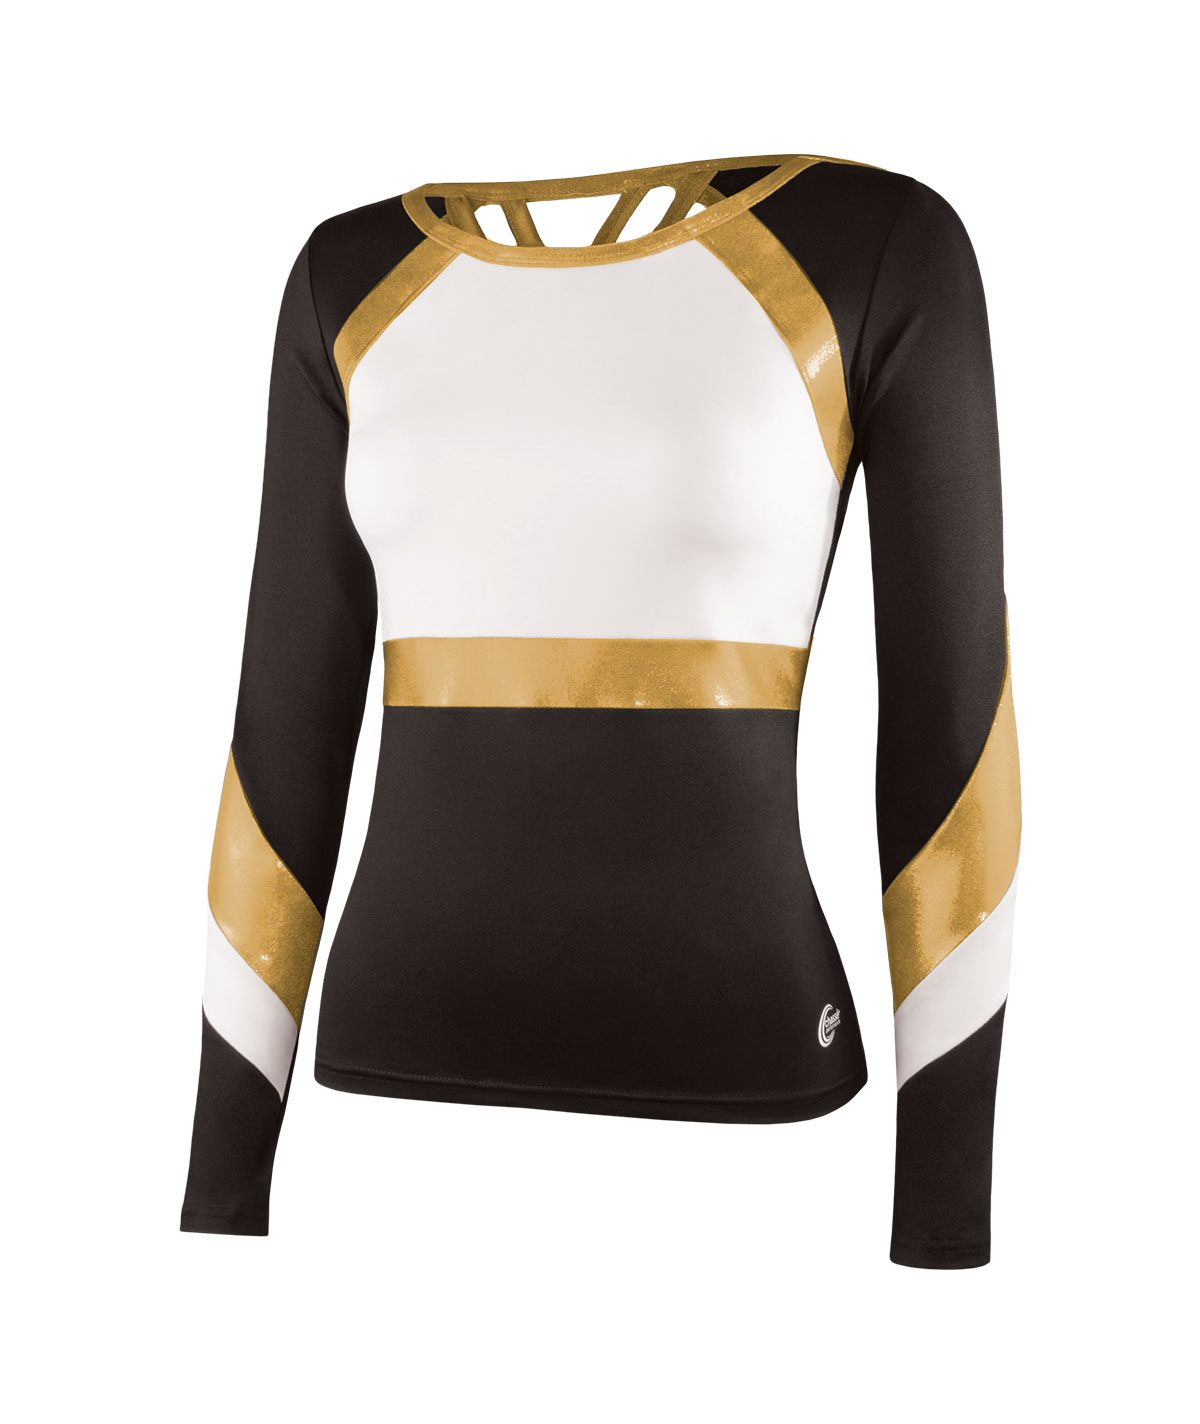 Chasse Performance Liberty Long Top Cheer Uniforms | Omni Cheer